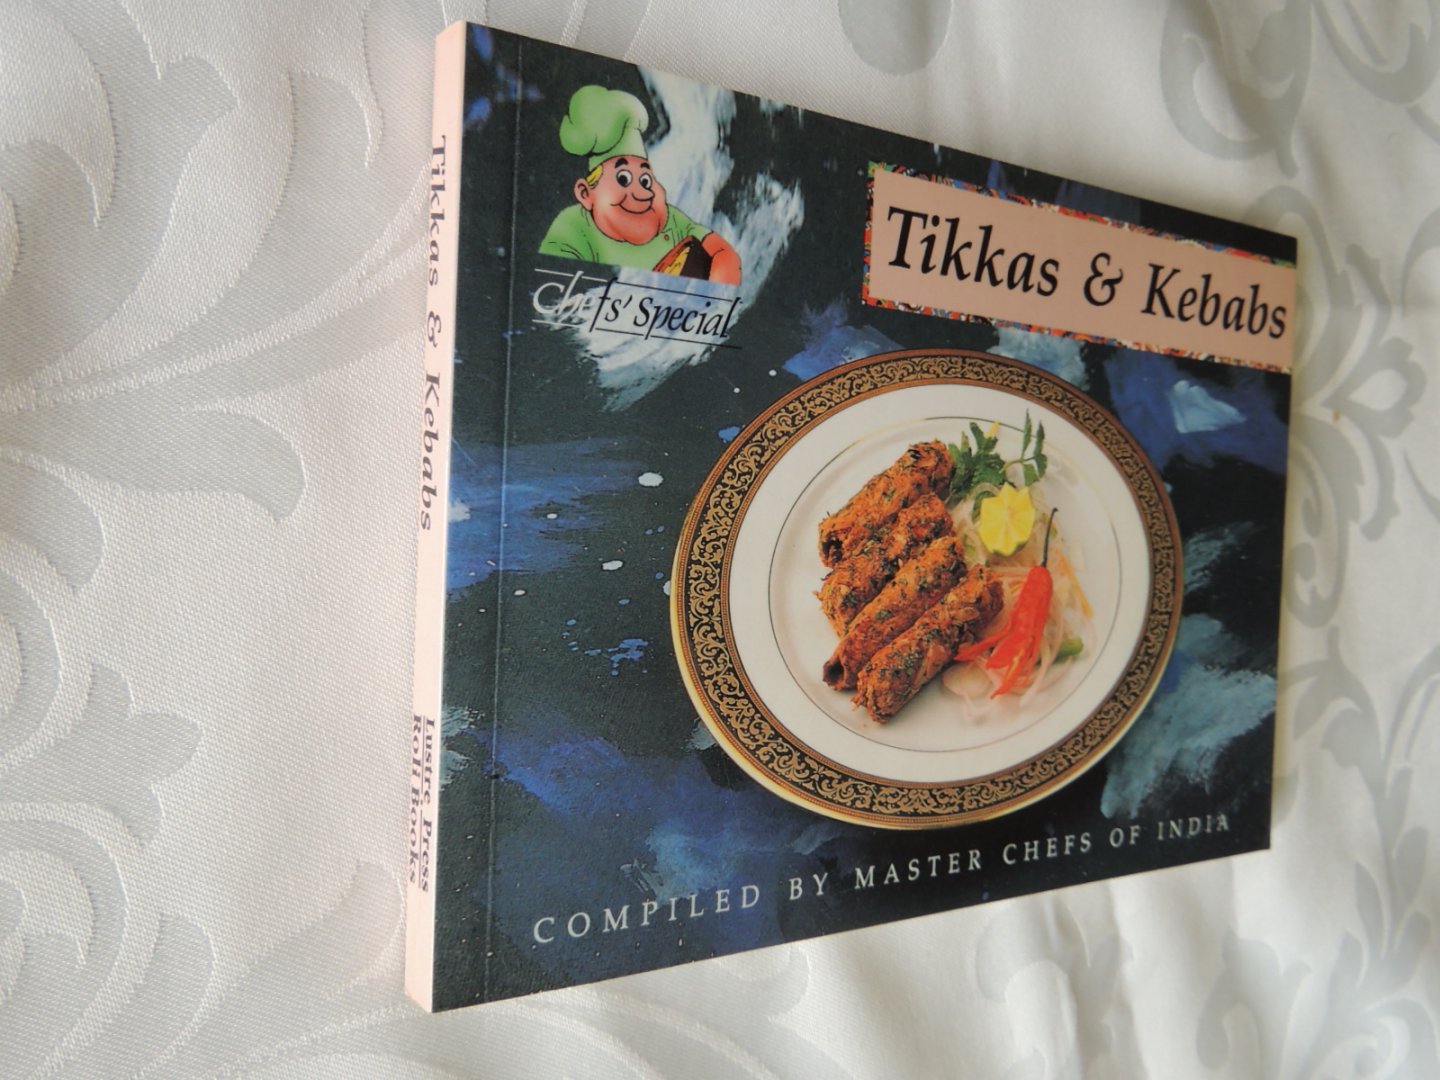  - Tikkas and Kebabs compiled by master chefs of india - Chef's Special